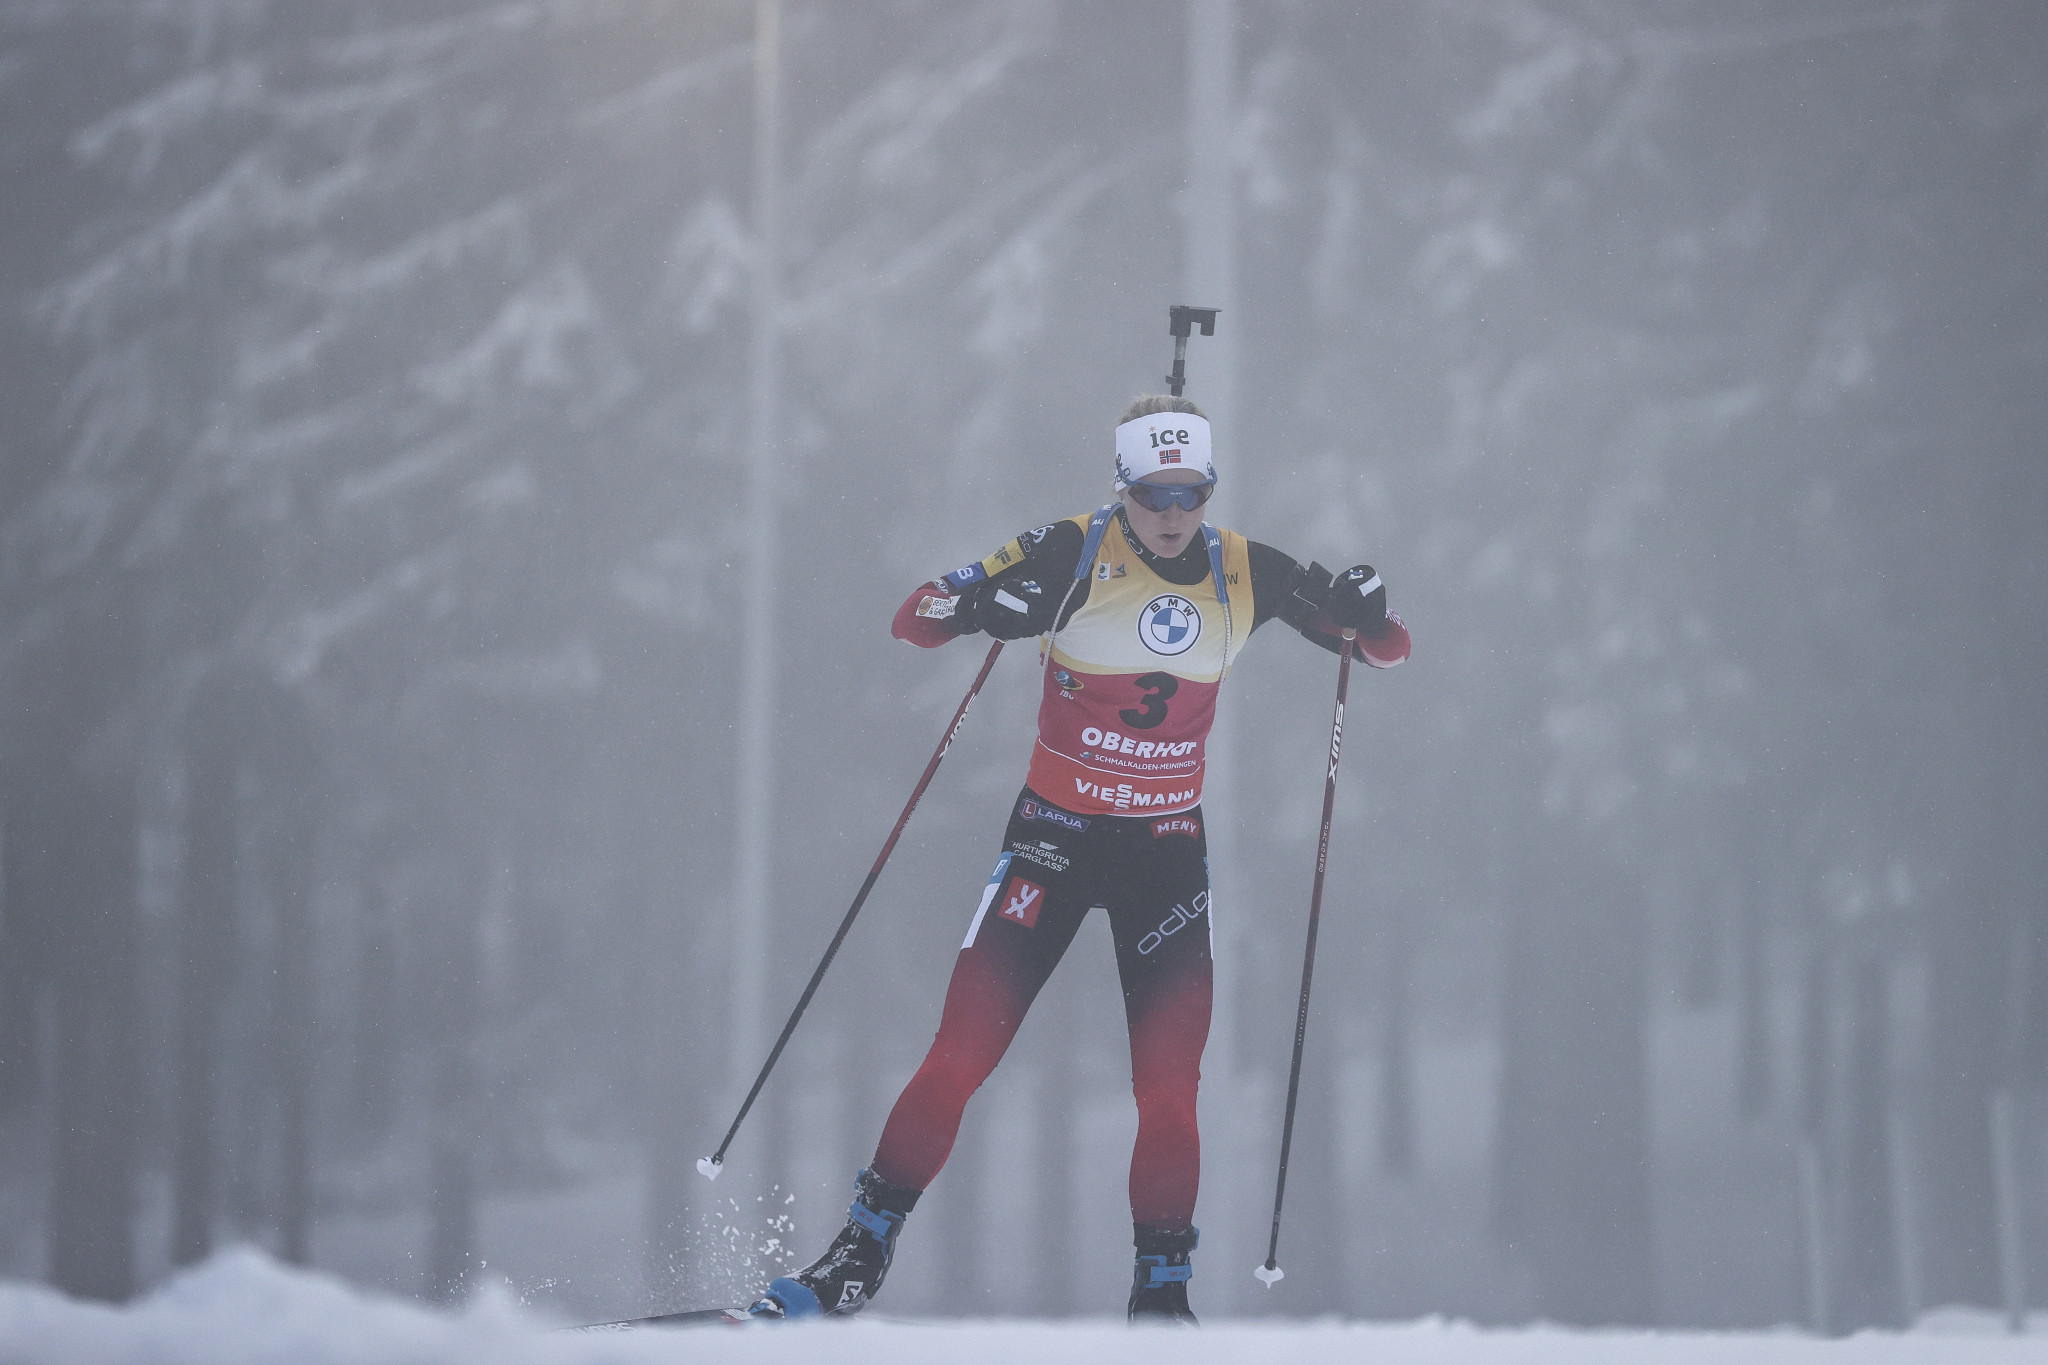 Røiseland completes sprint-pursuit double at Biathlon World Cup in Oberhof